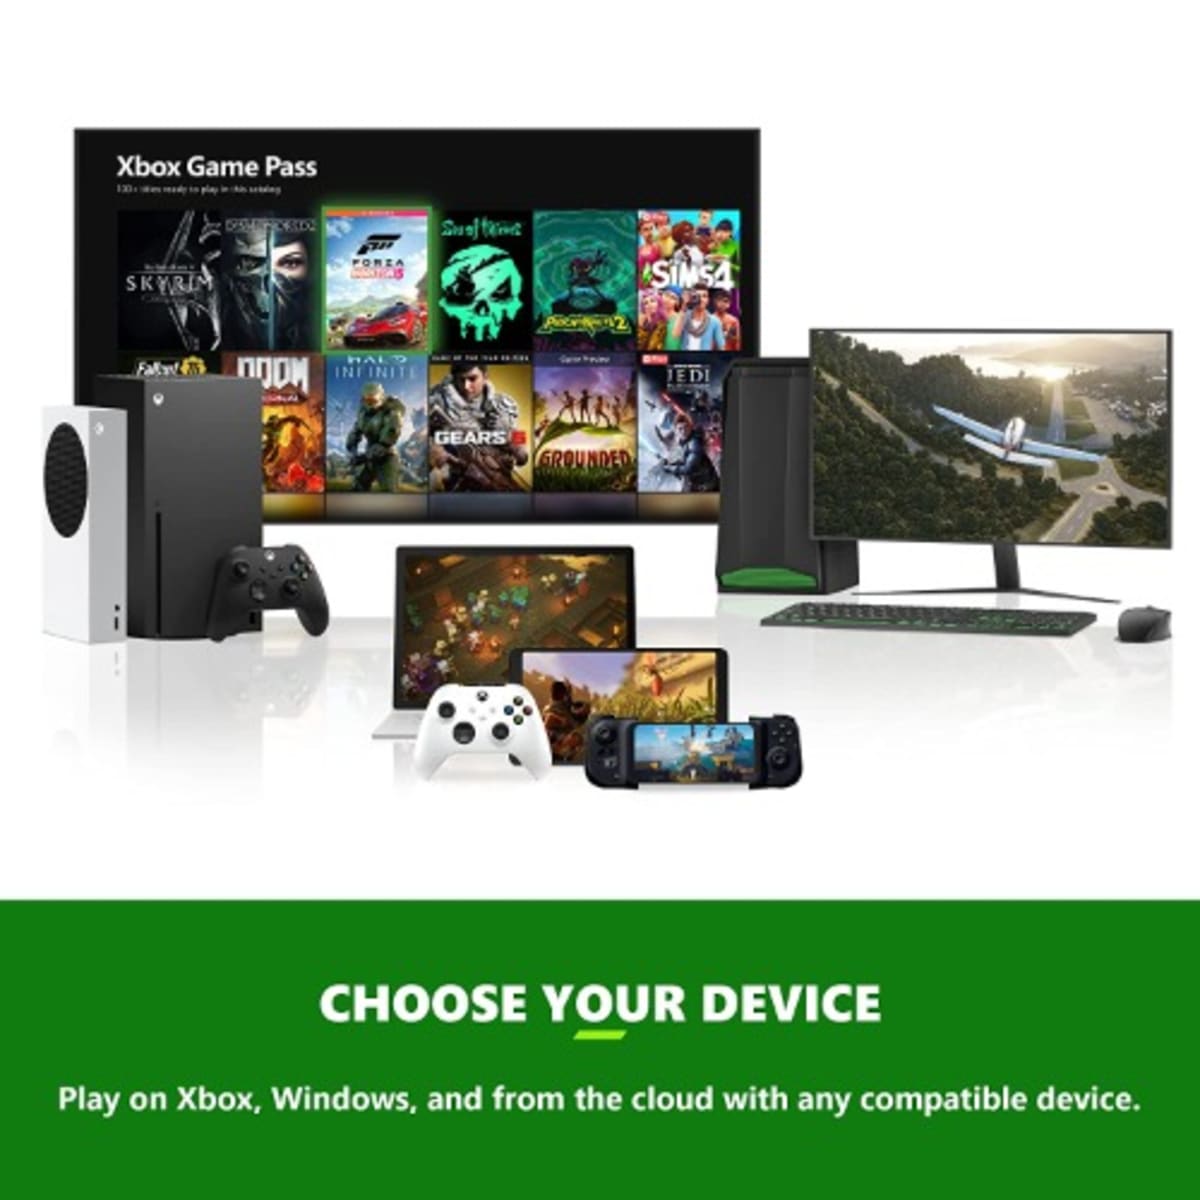 Xbox Game Pass Ultimate – 12 Months Subscription - Xbox One/ Windows 10